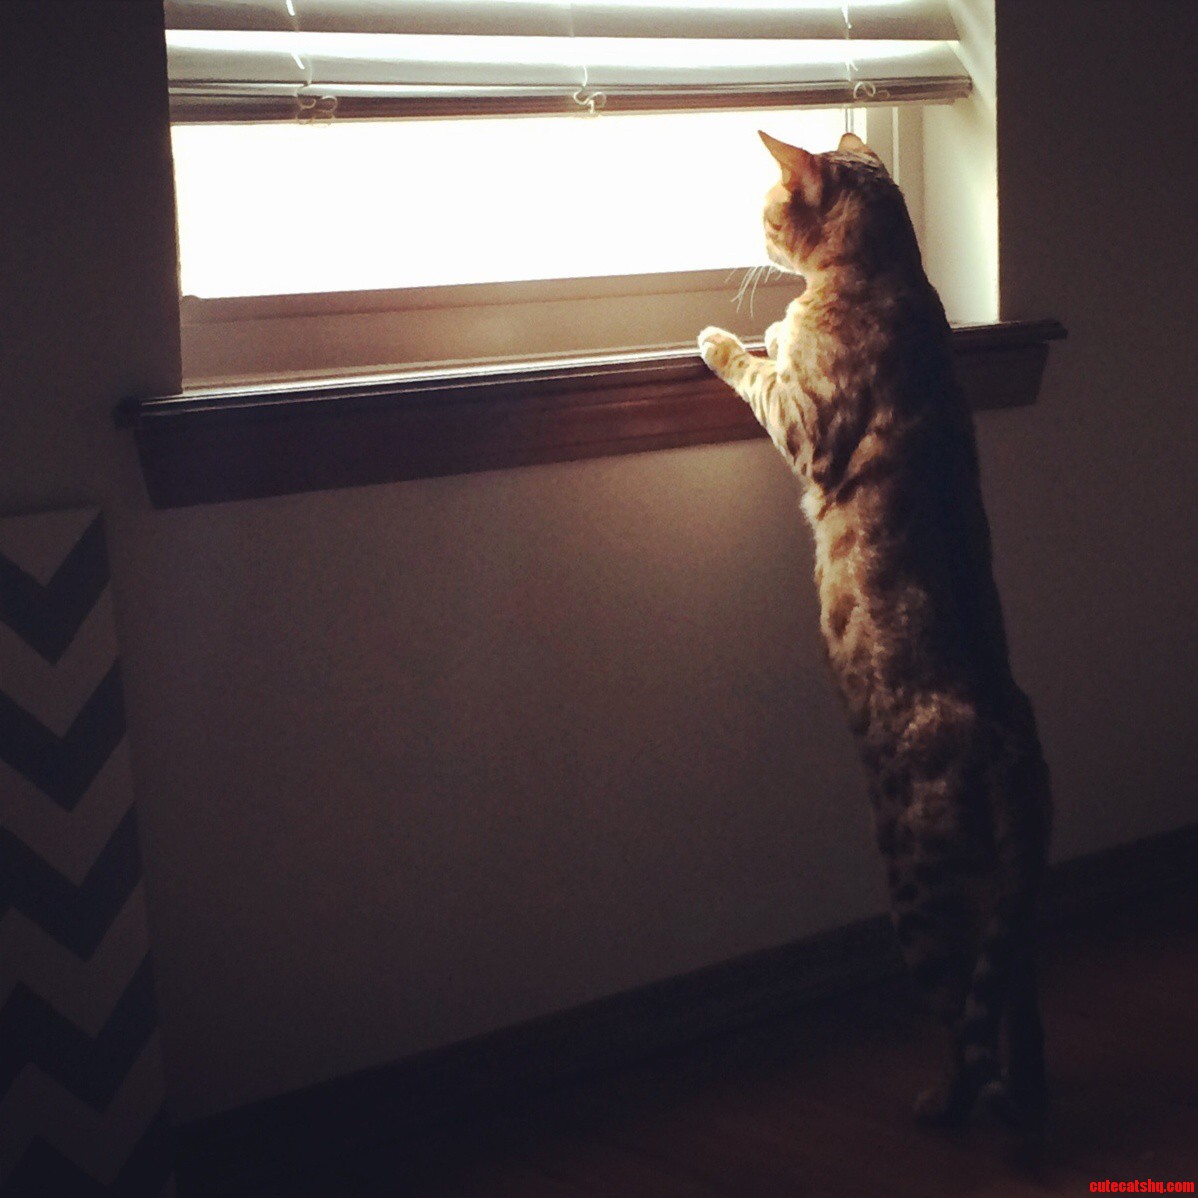 Catsby Scratched The Blinds For Five Minutes Just To Bird Watch For Ten Seconds.